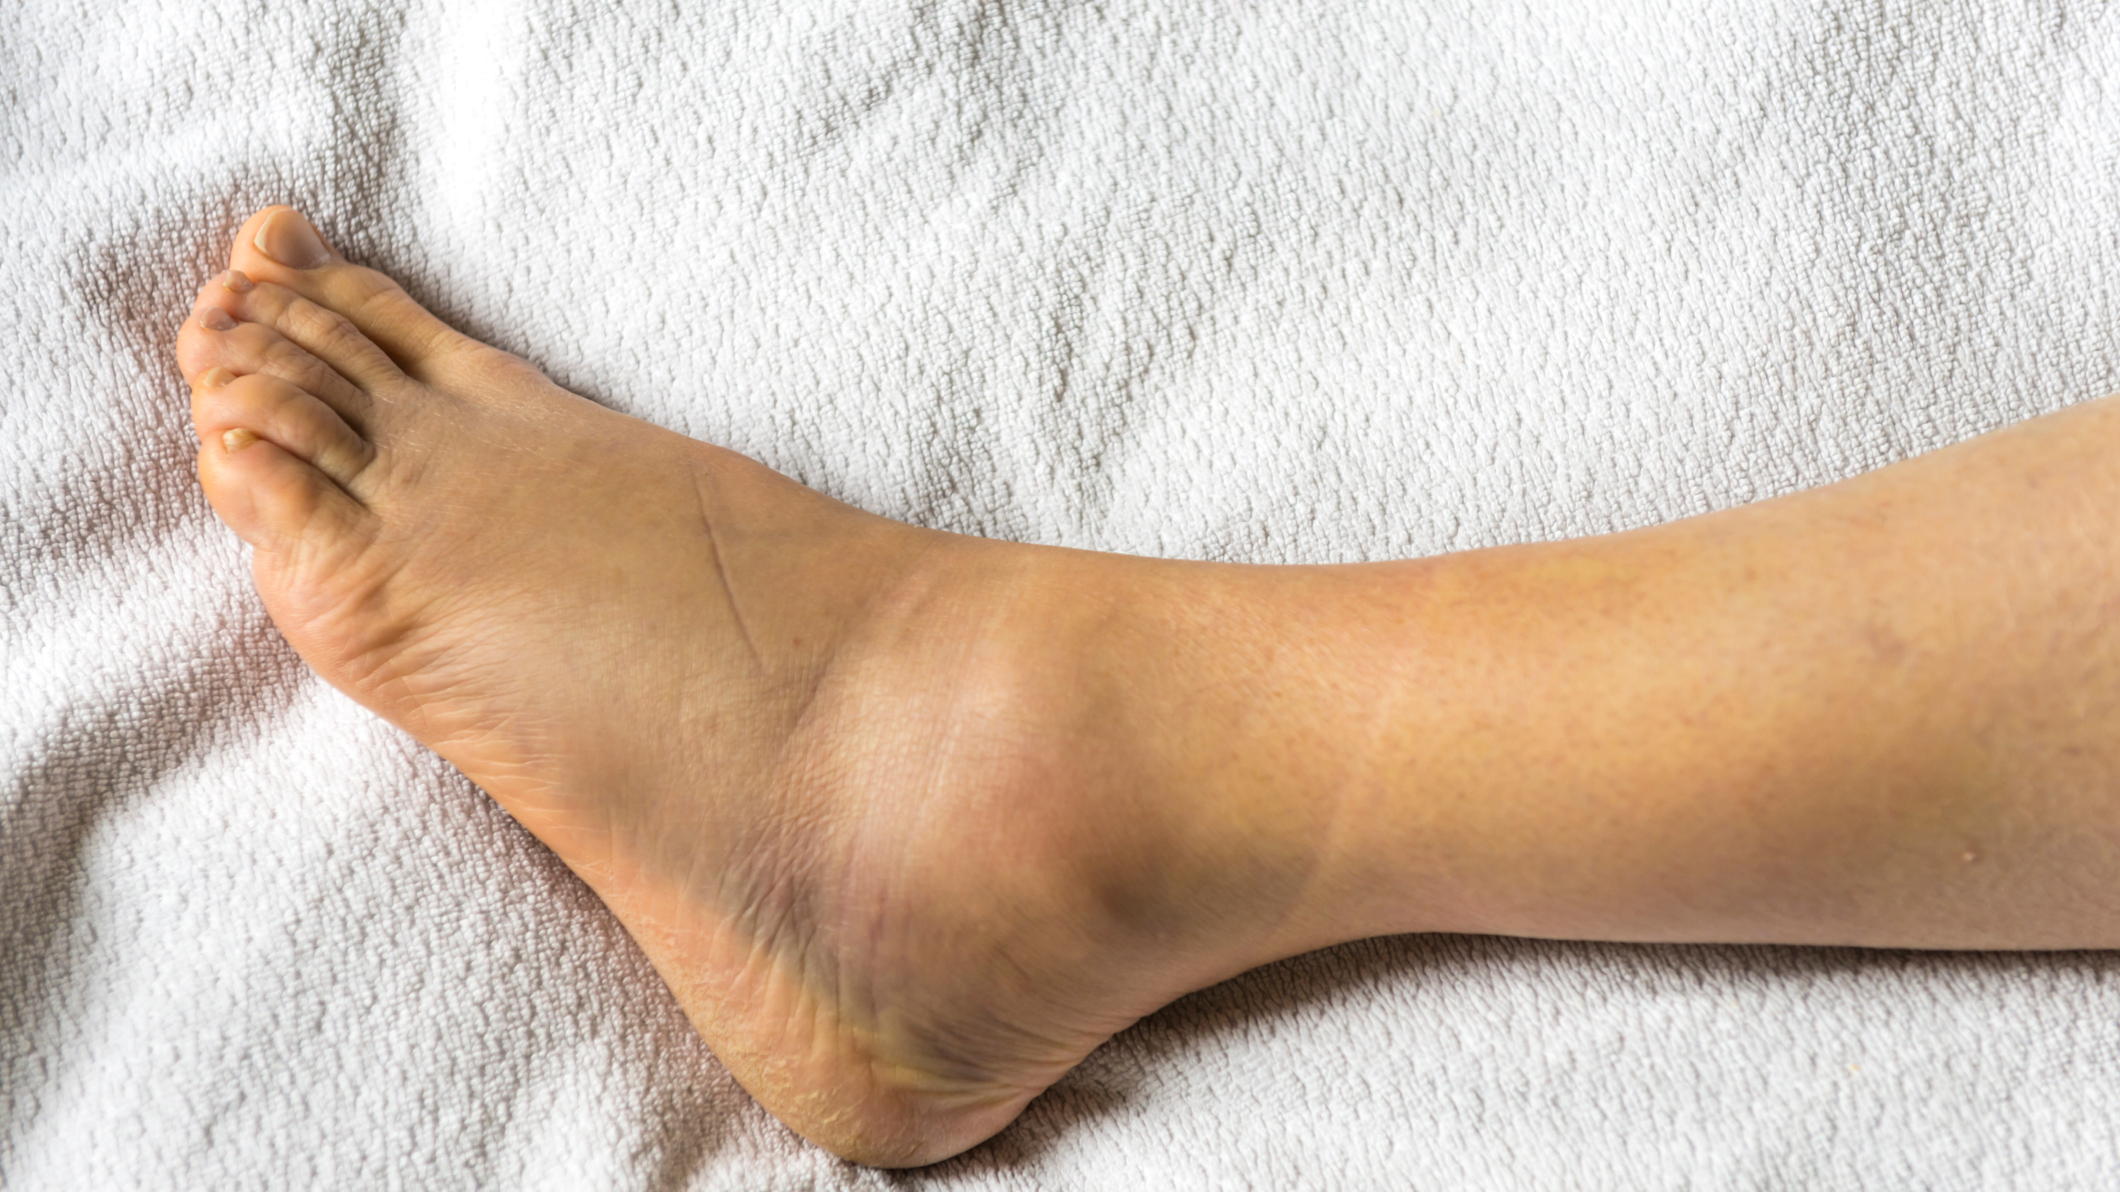 Foot Sprain Treatment - Foot and Ankle Surgeons of New York